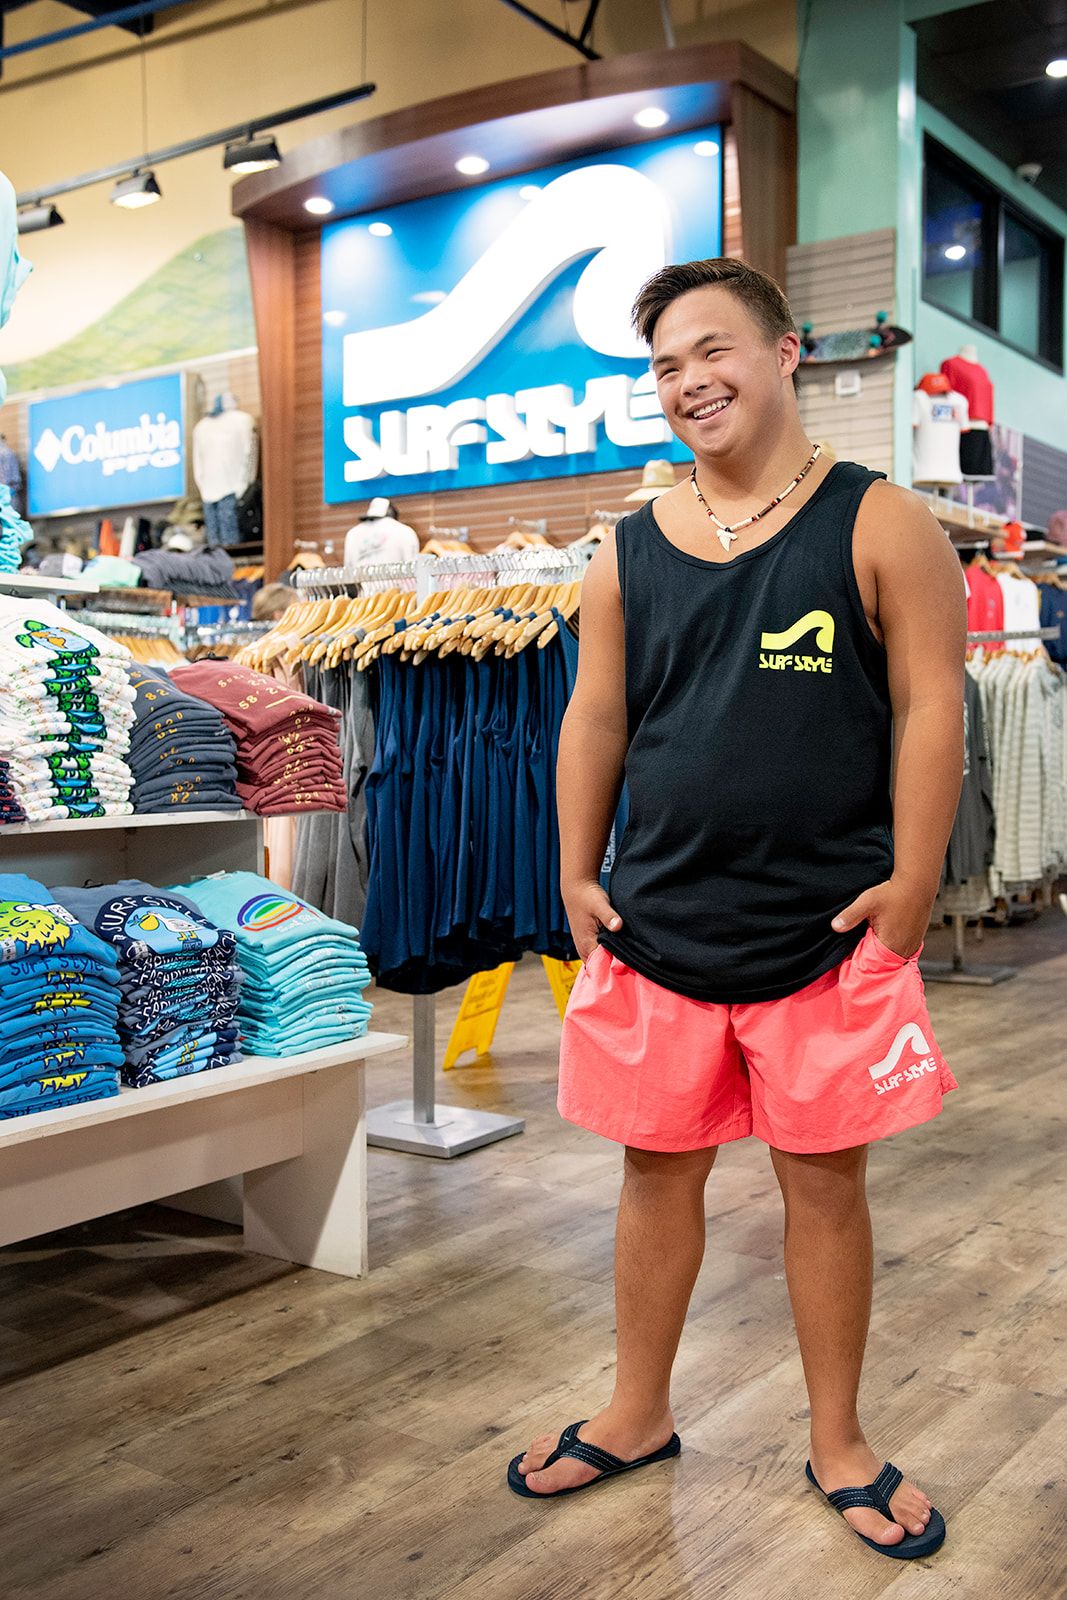 Model with down syndrome: Surf Style wanted him immediately